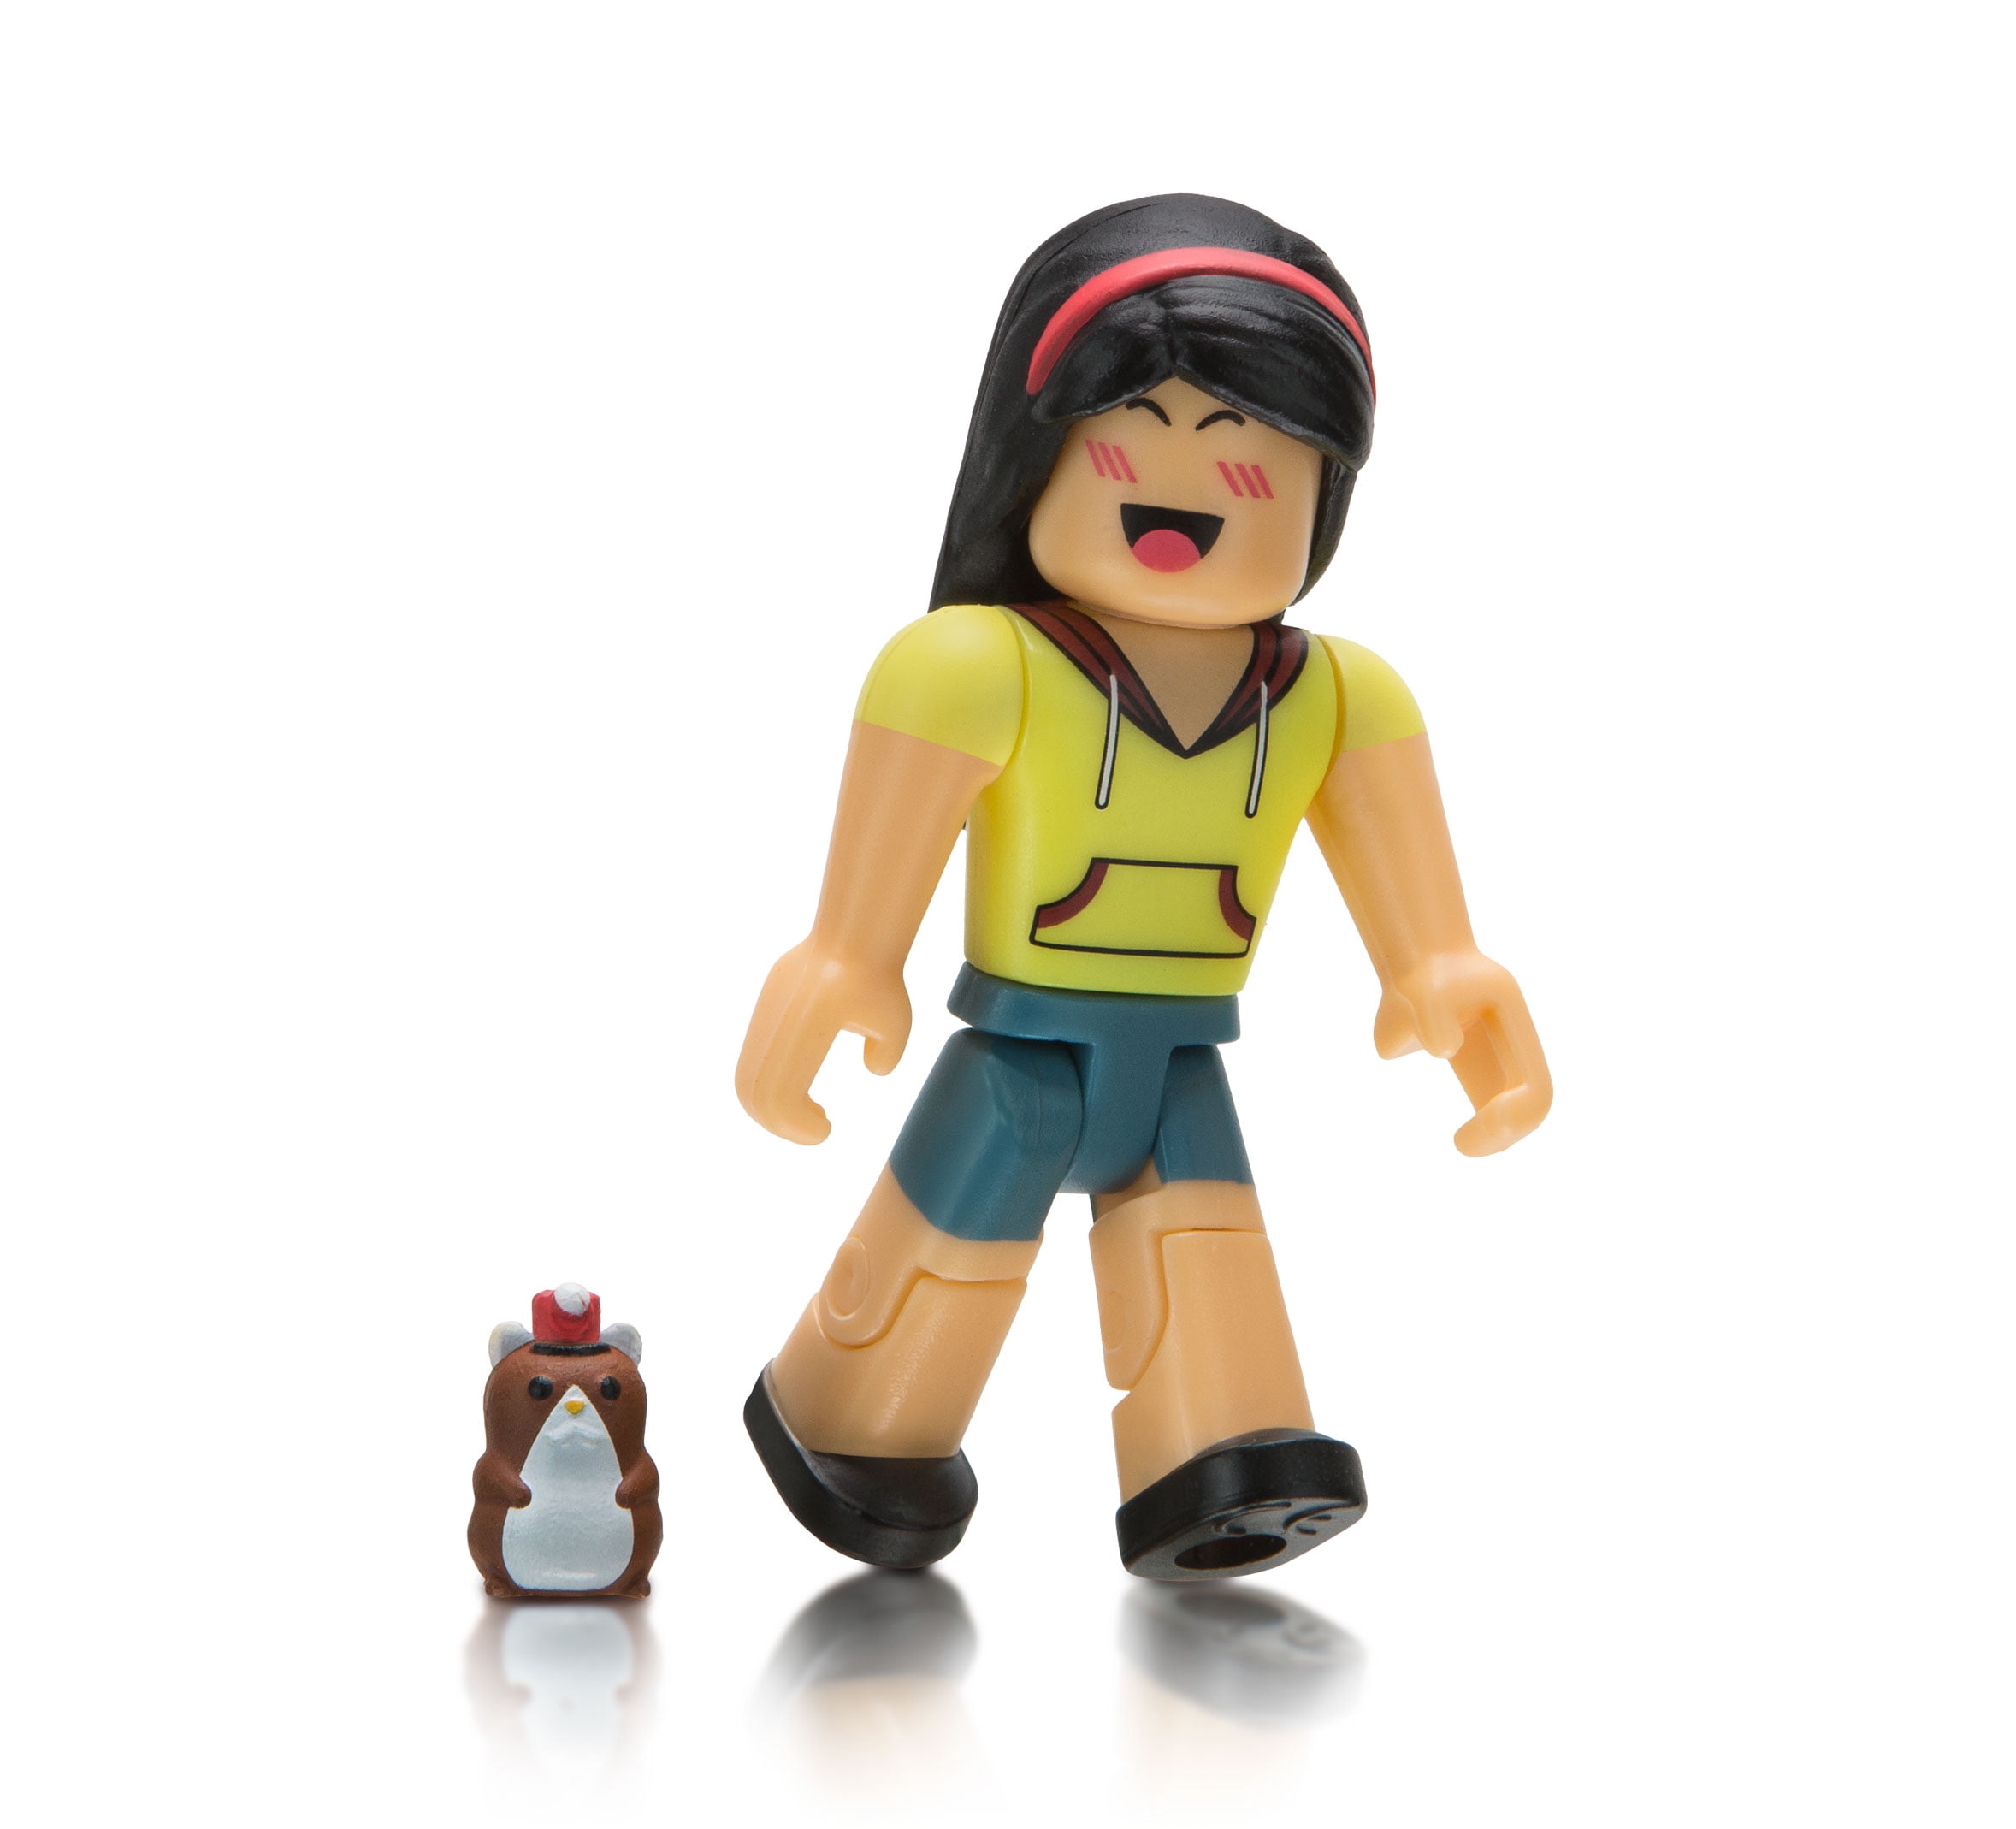 Roblox Celebrity Collection Series 1 Mystery Figure Includes 1 Figure Exclusive Virtual Item Walmart Com Walmart Com - abs with hand wraps roblox